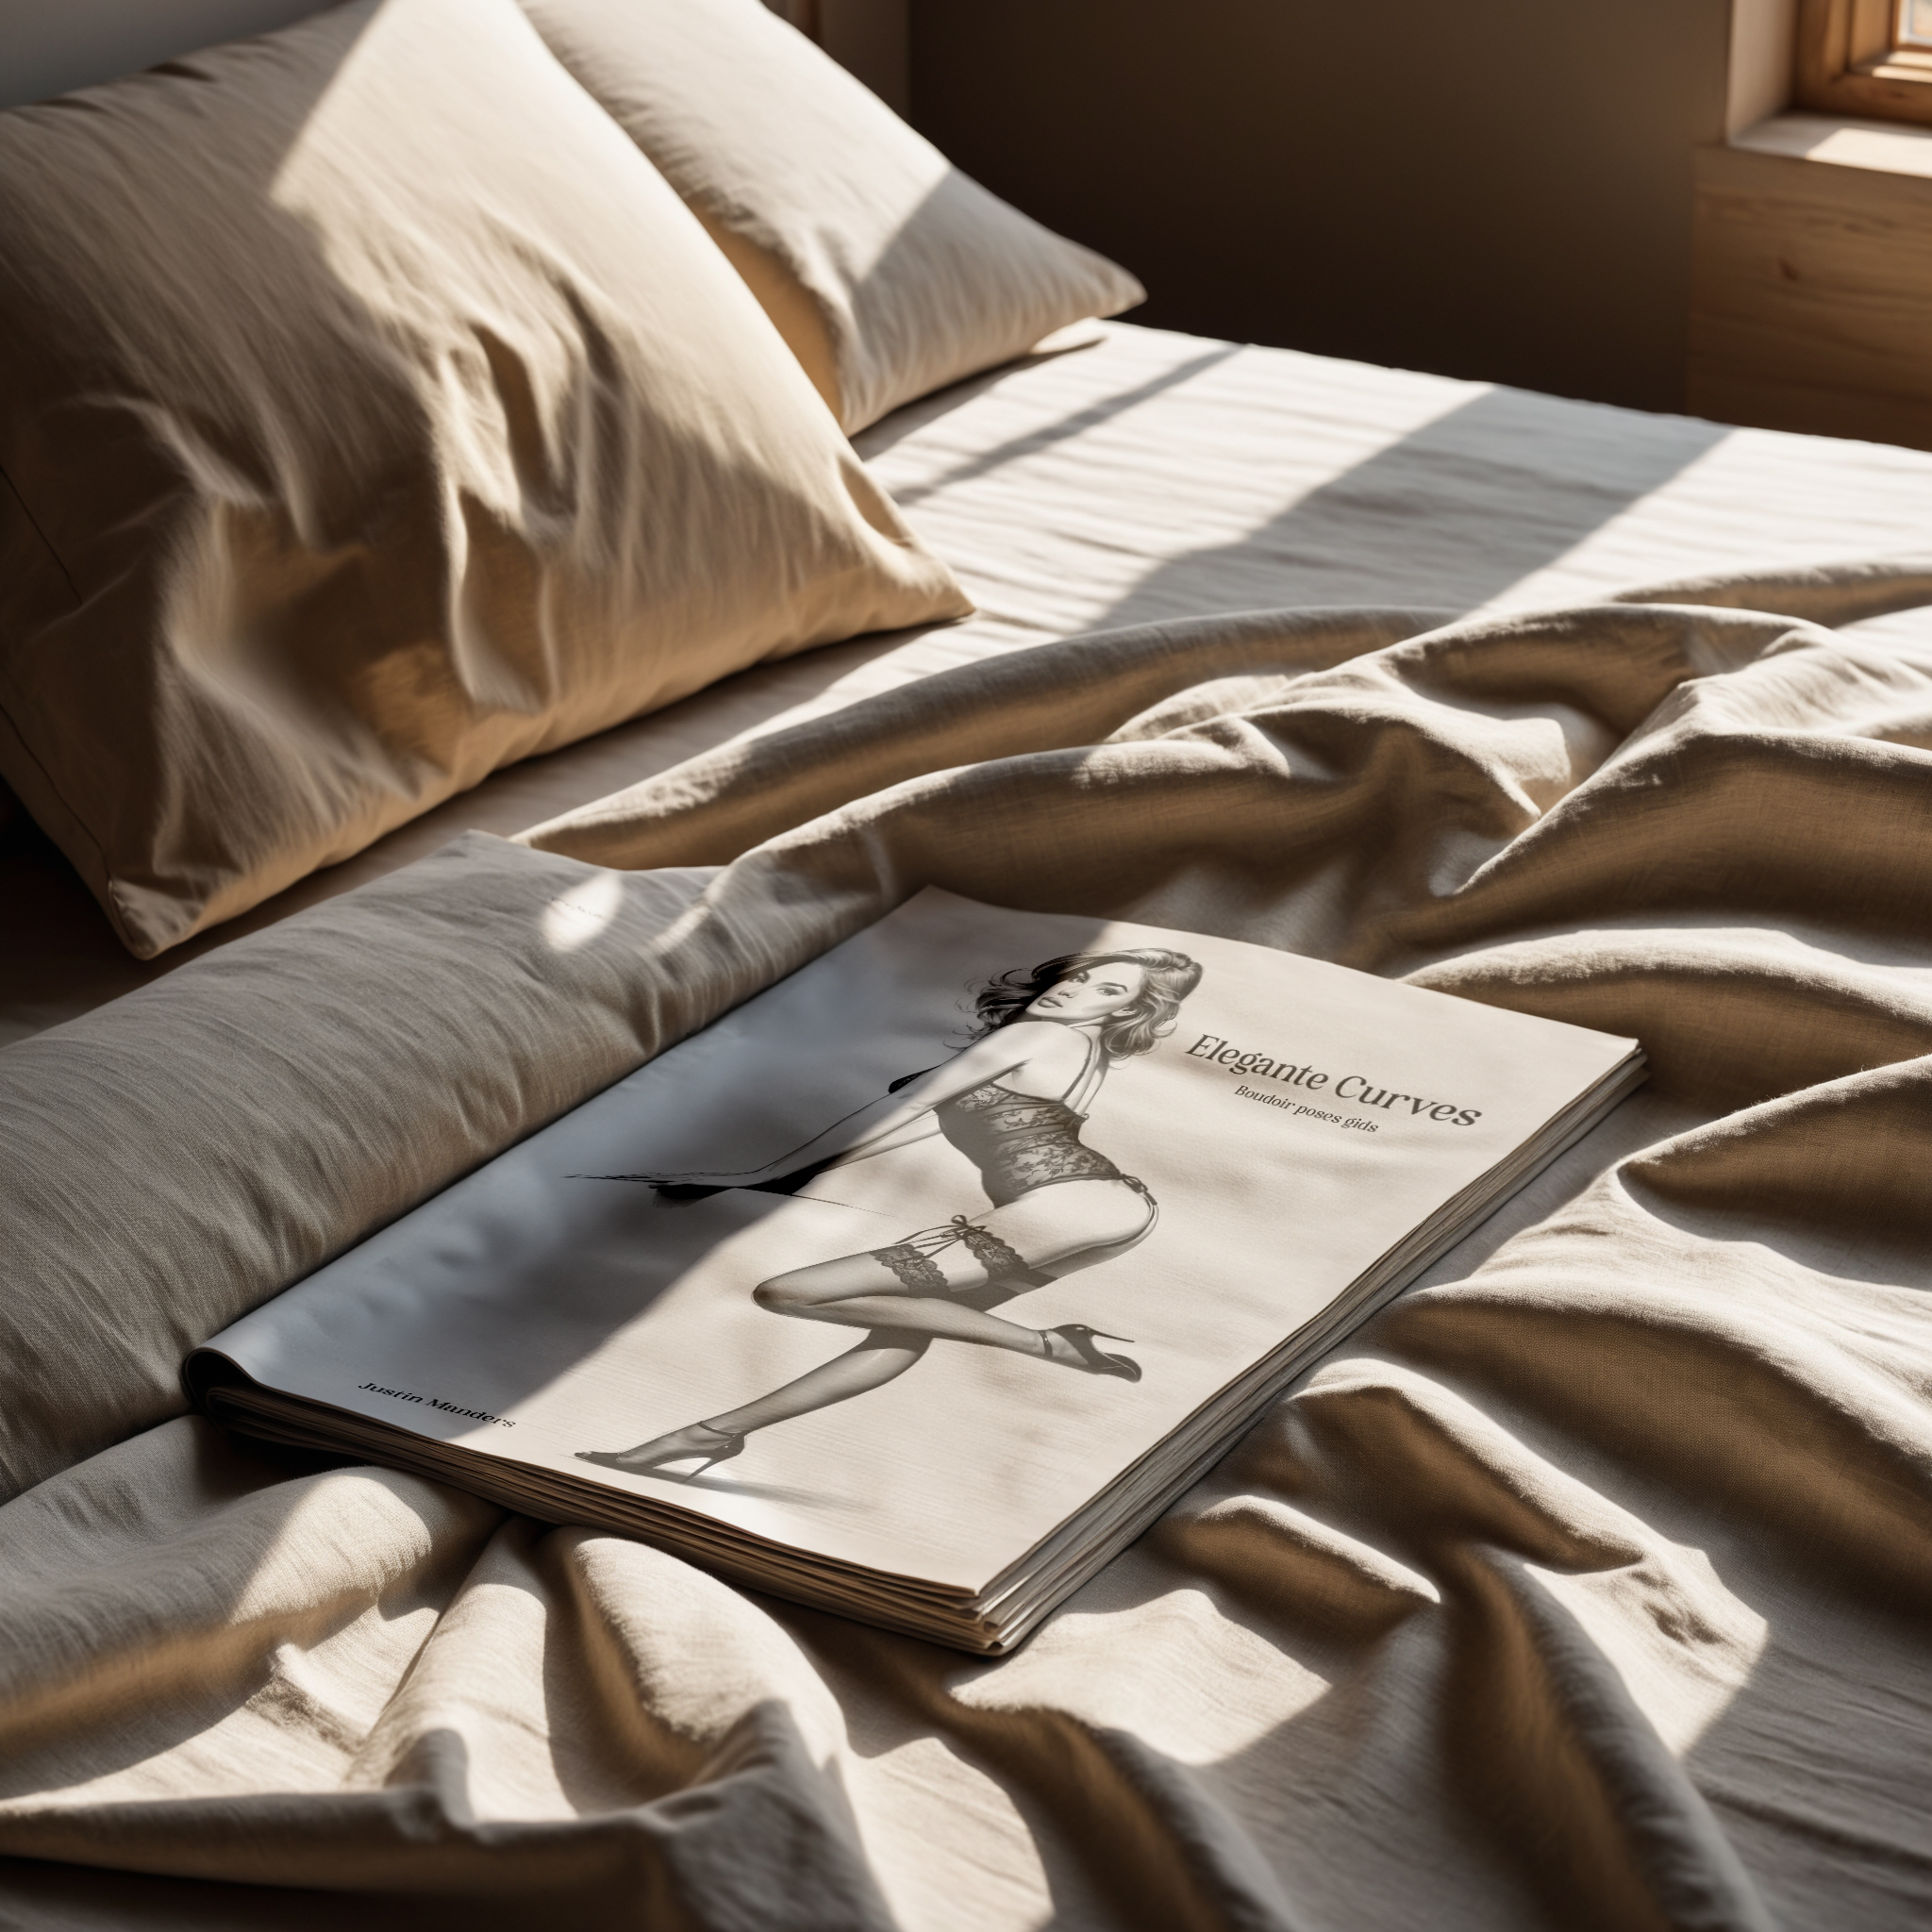 A magazine with a lingerie ad lies on a sunlit, unmade bed with pillows and crumpled sheets.